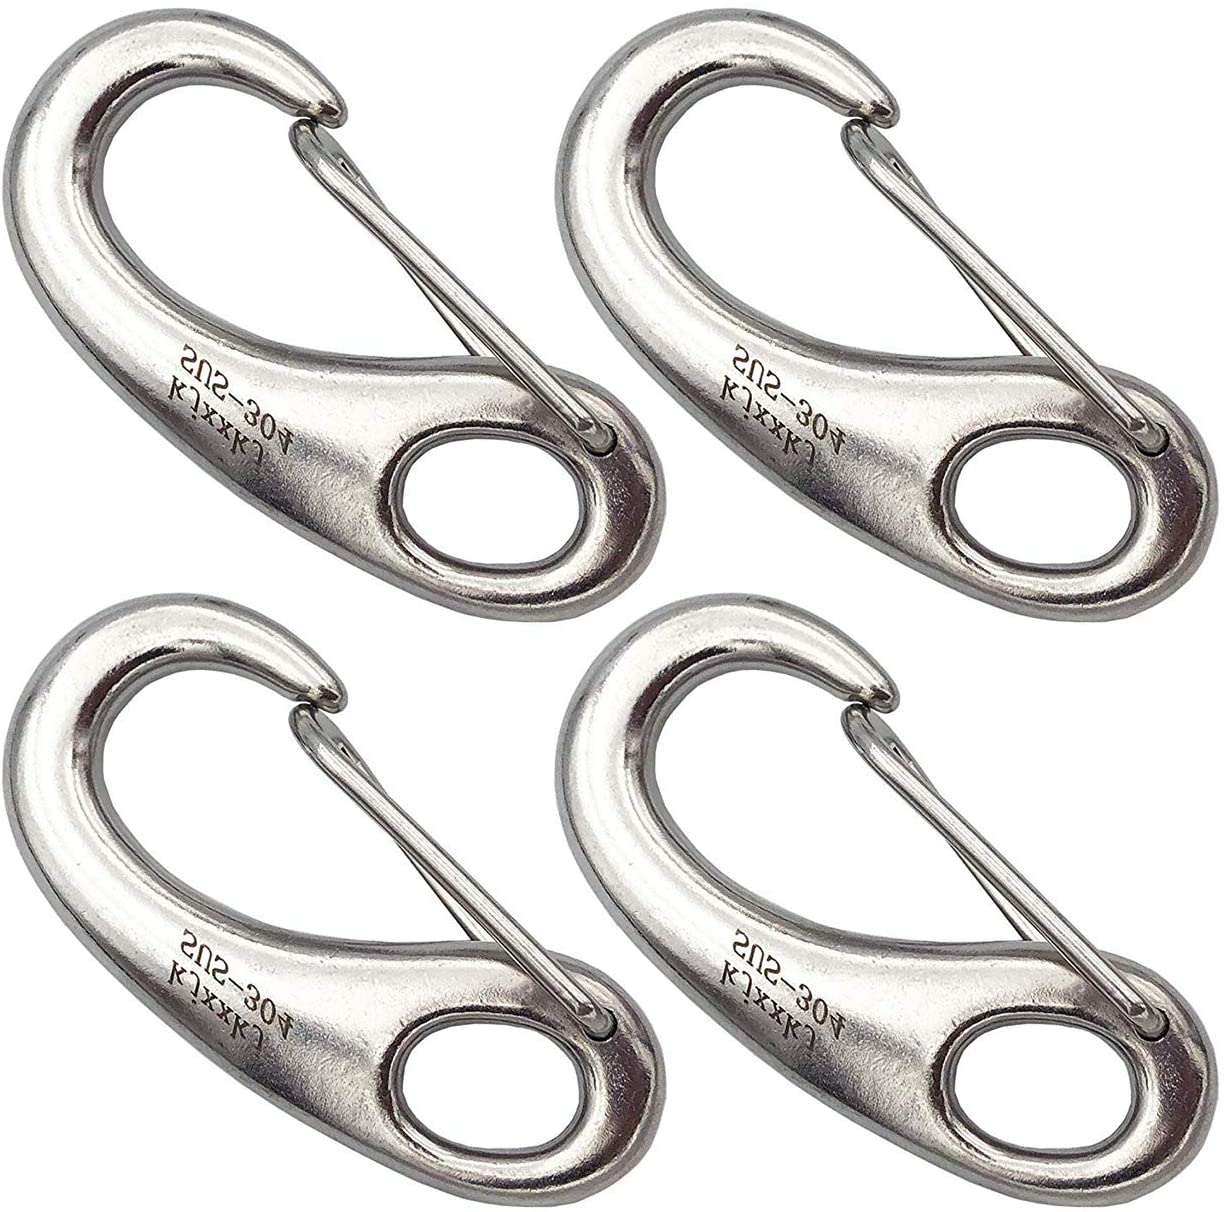 Hiking and More Magiin 4PCS Spring Snap Hook Clip Multifunctional Quick Link Carabiner Stainless Steel Flag Pole Hardware to Attach for Camping,Climbing